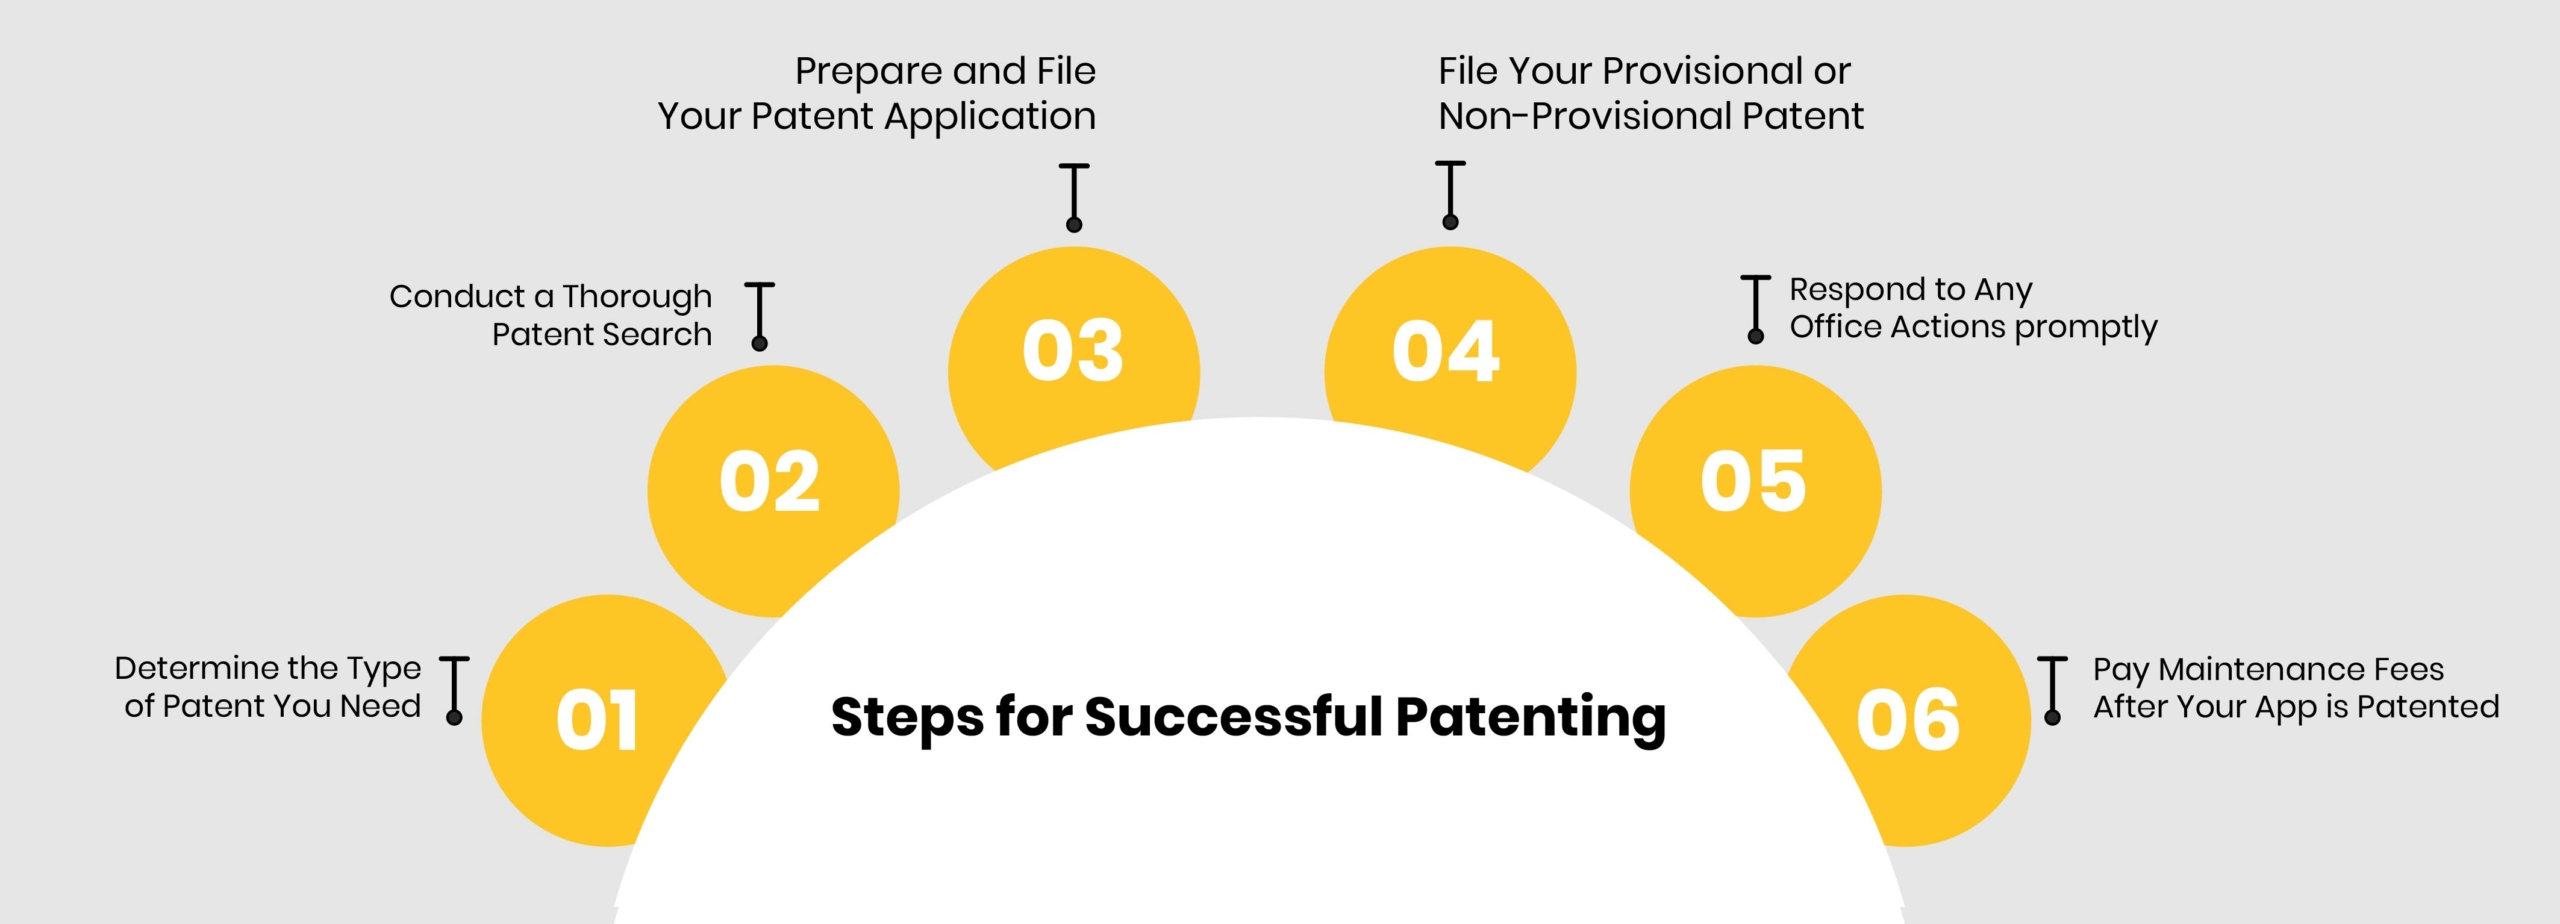 Steps for Successful Patenting